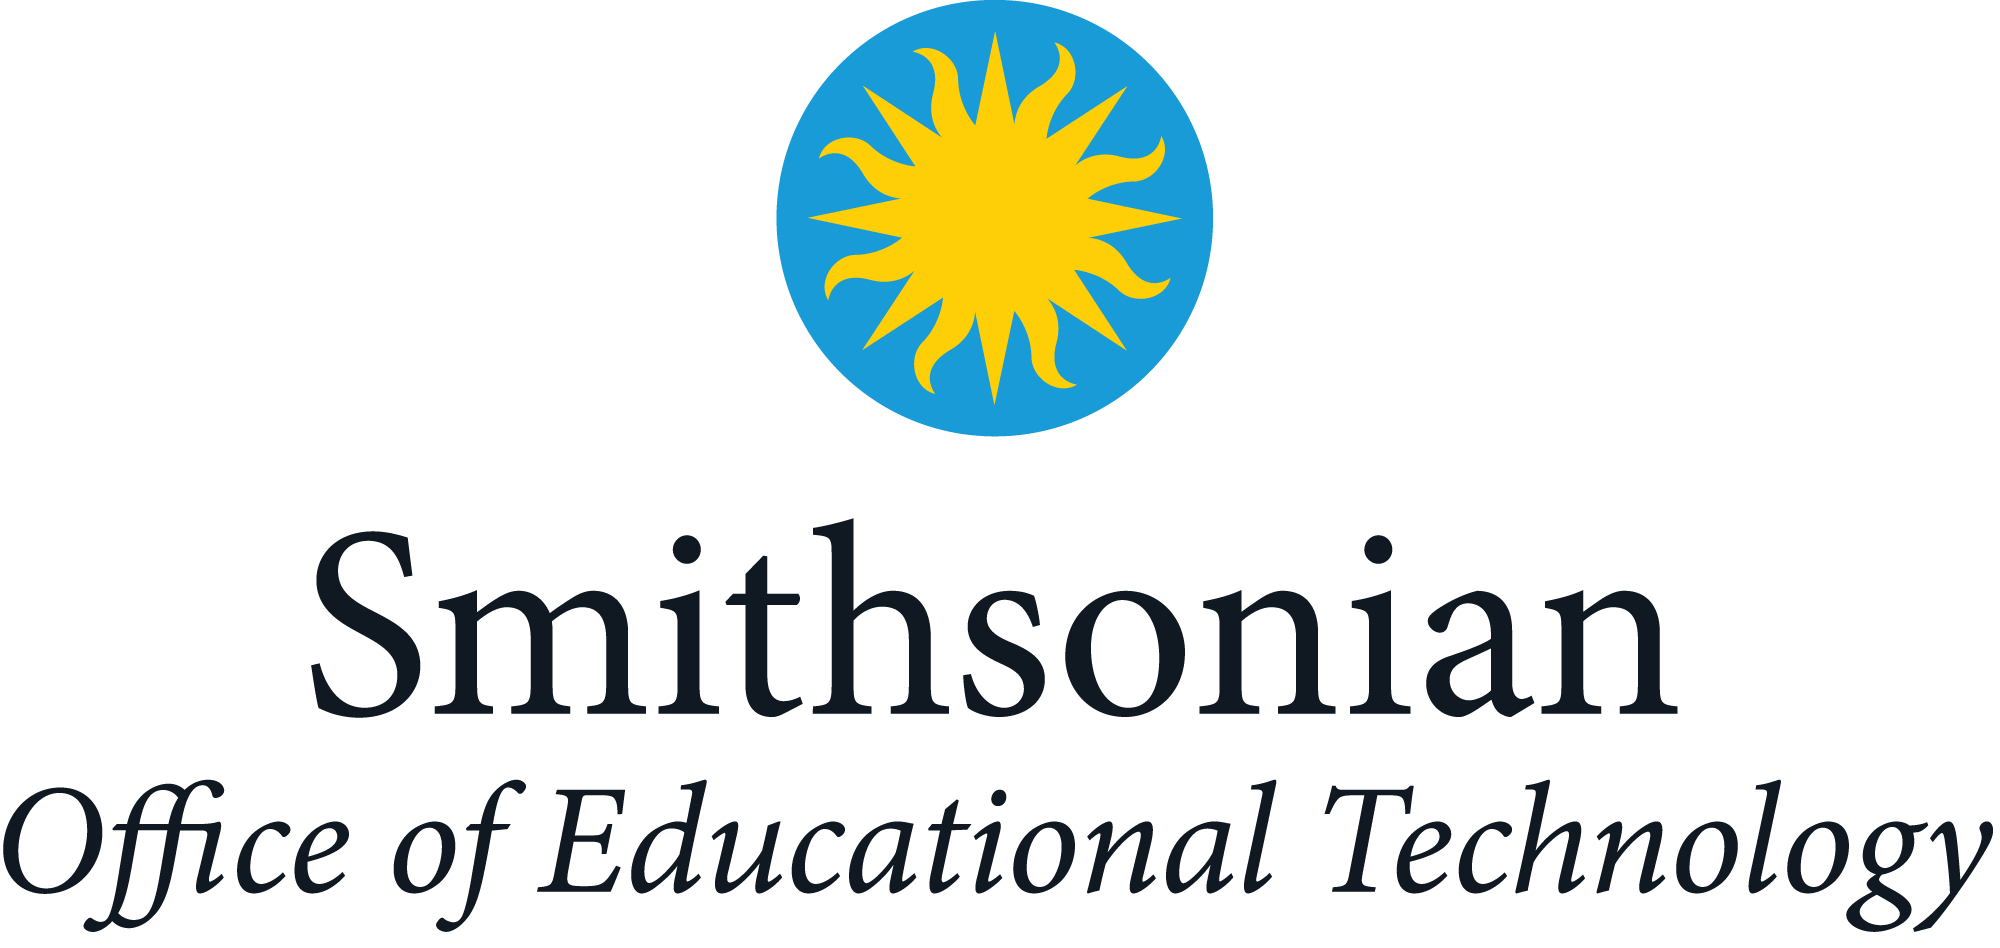 About the Smithsonian Office of Educational Technology | Smithsonian Learning Lab